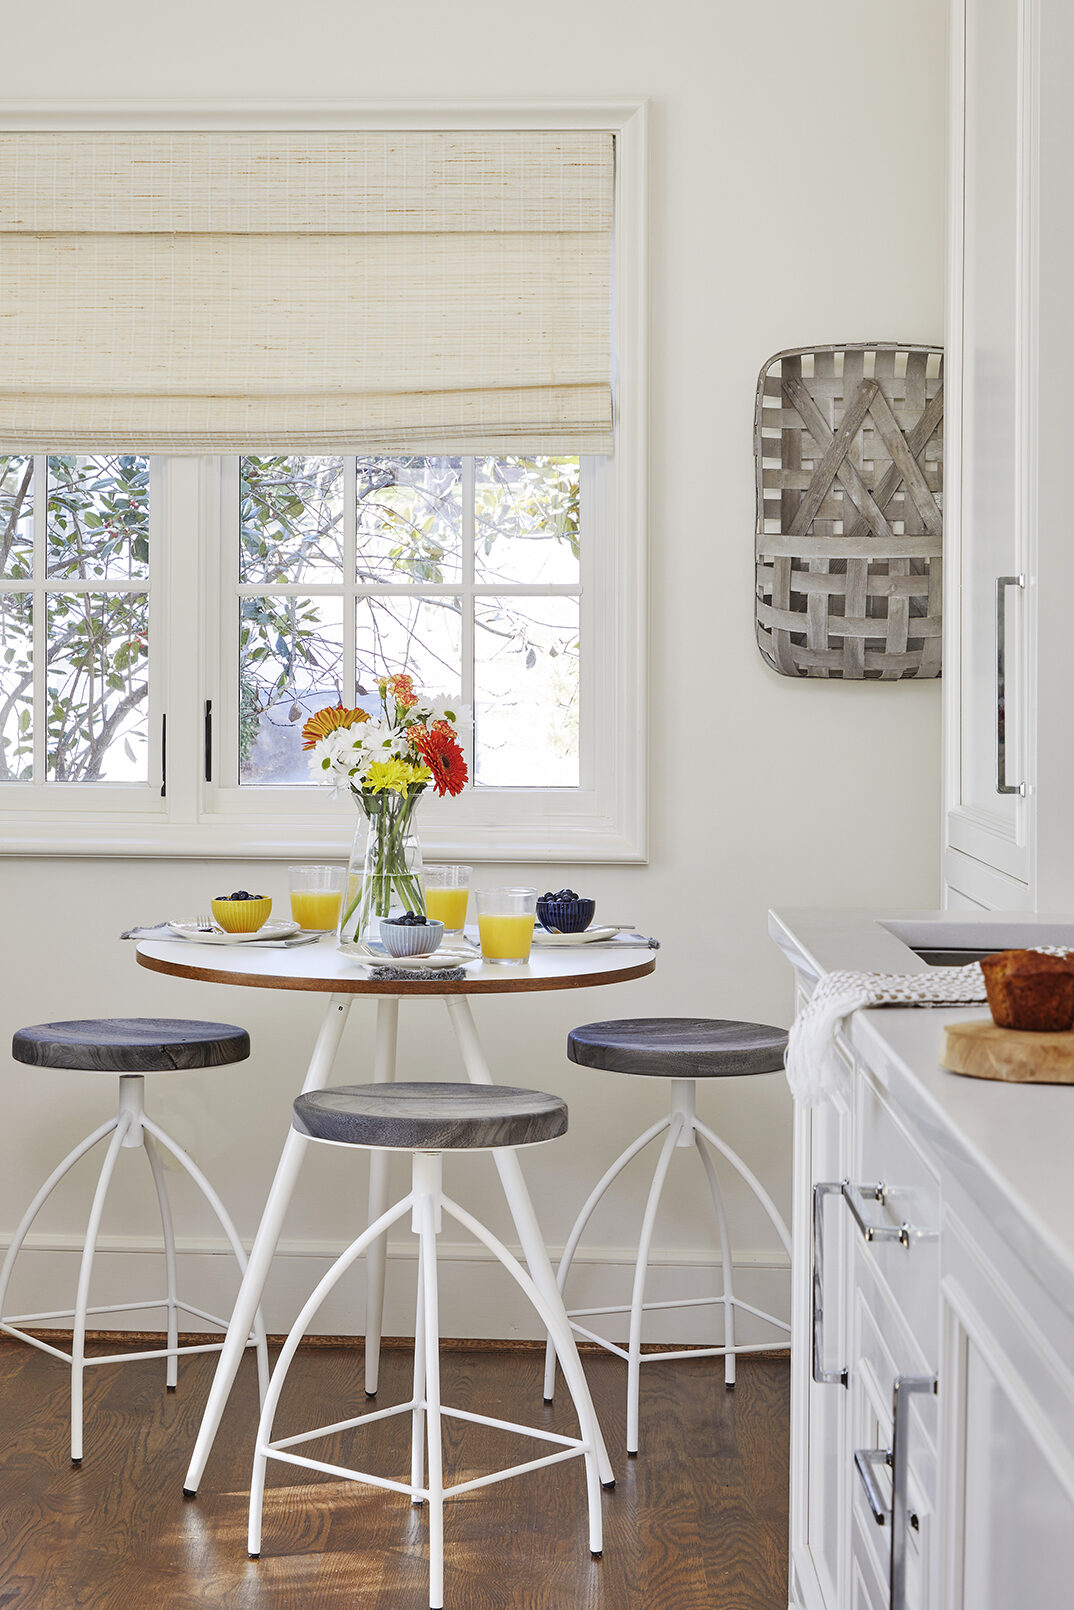 A casual dining table with barstools in the backyard guest house.